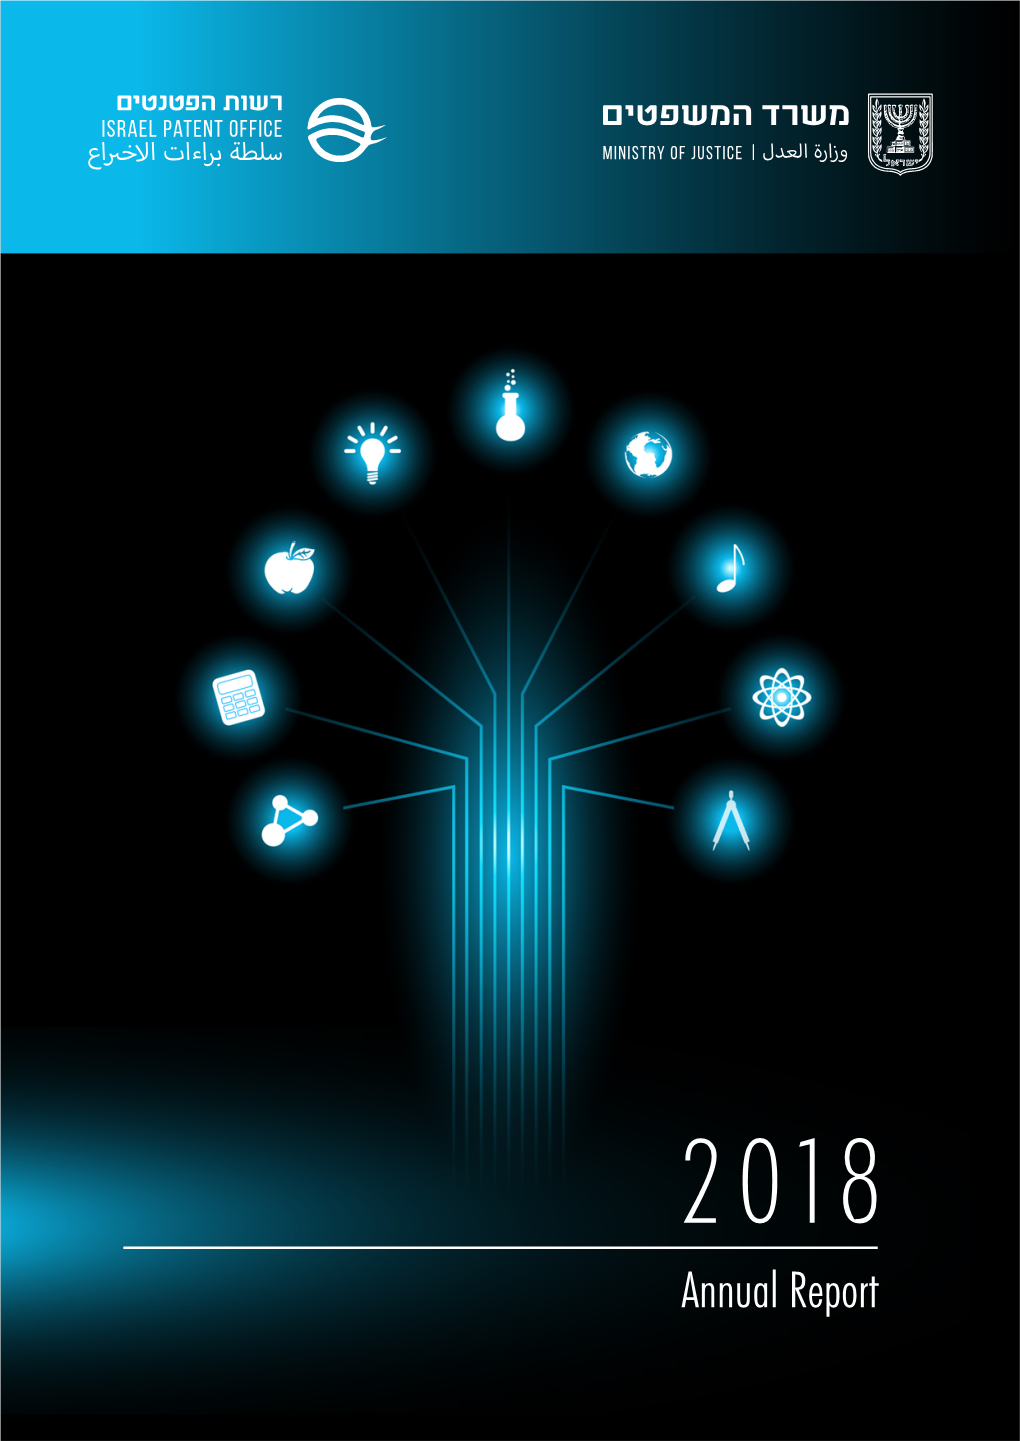 Israel Patent Office 2018 Annual Report